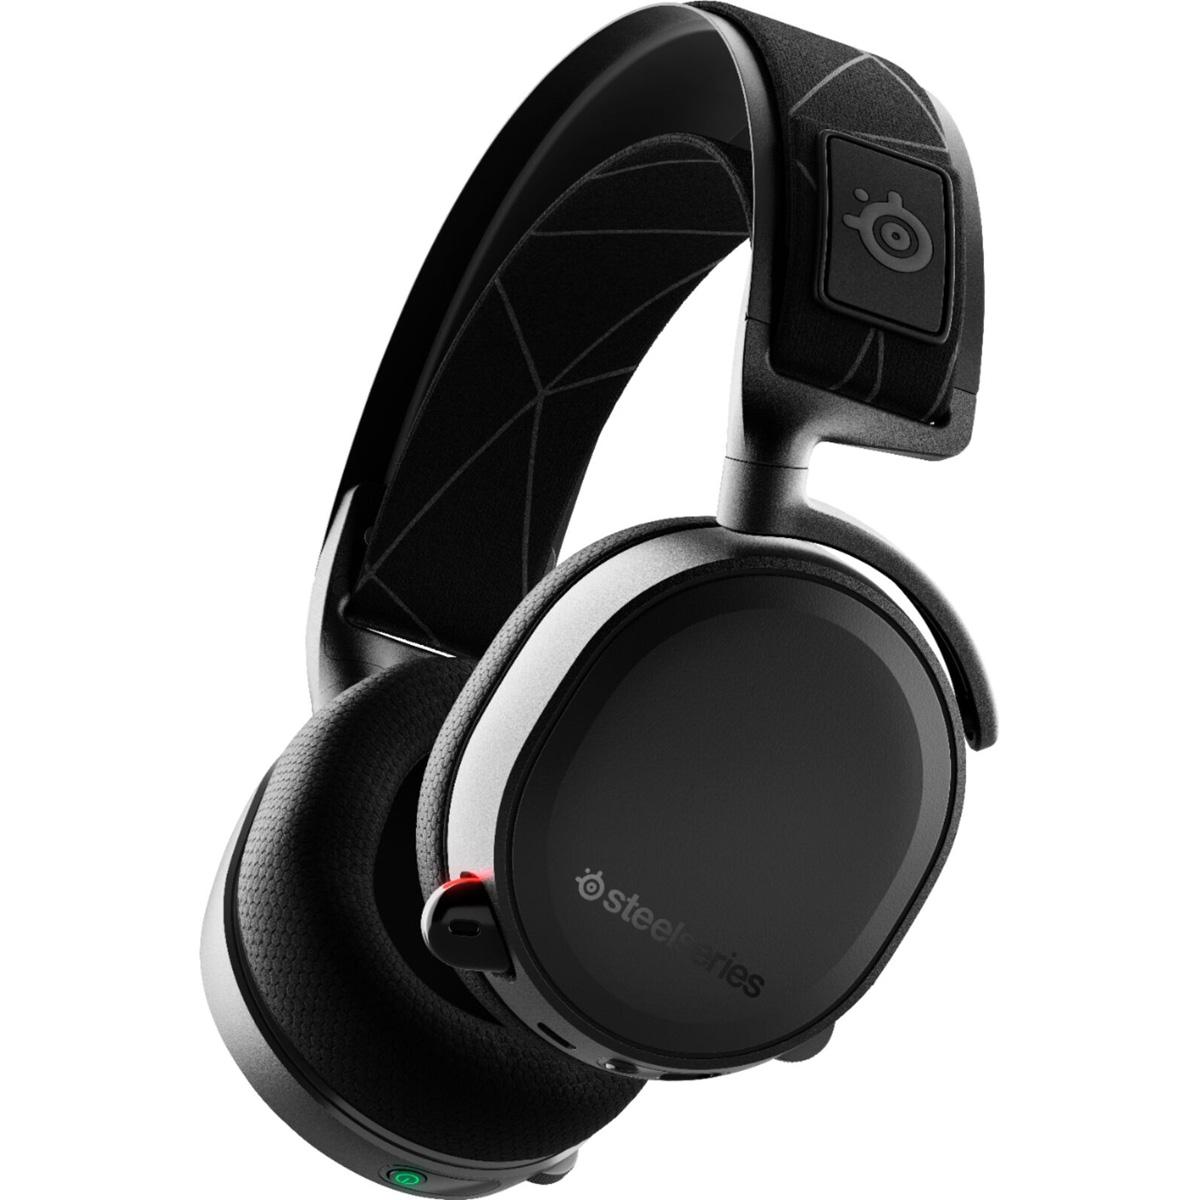 SteelSeries Arctis 7 Wireless Gaming Headset with DTS for $109.99 Shipped